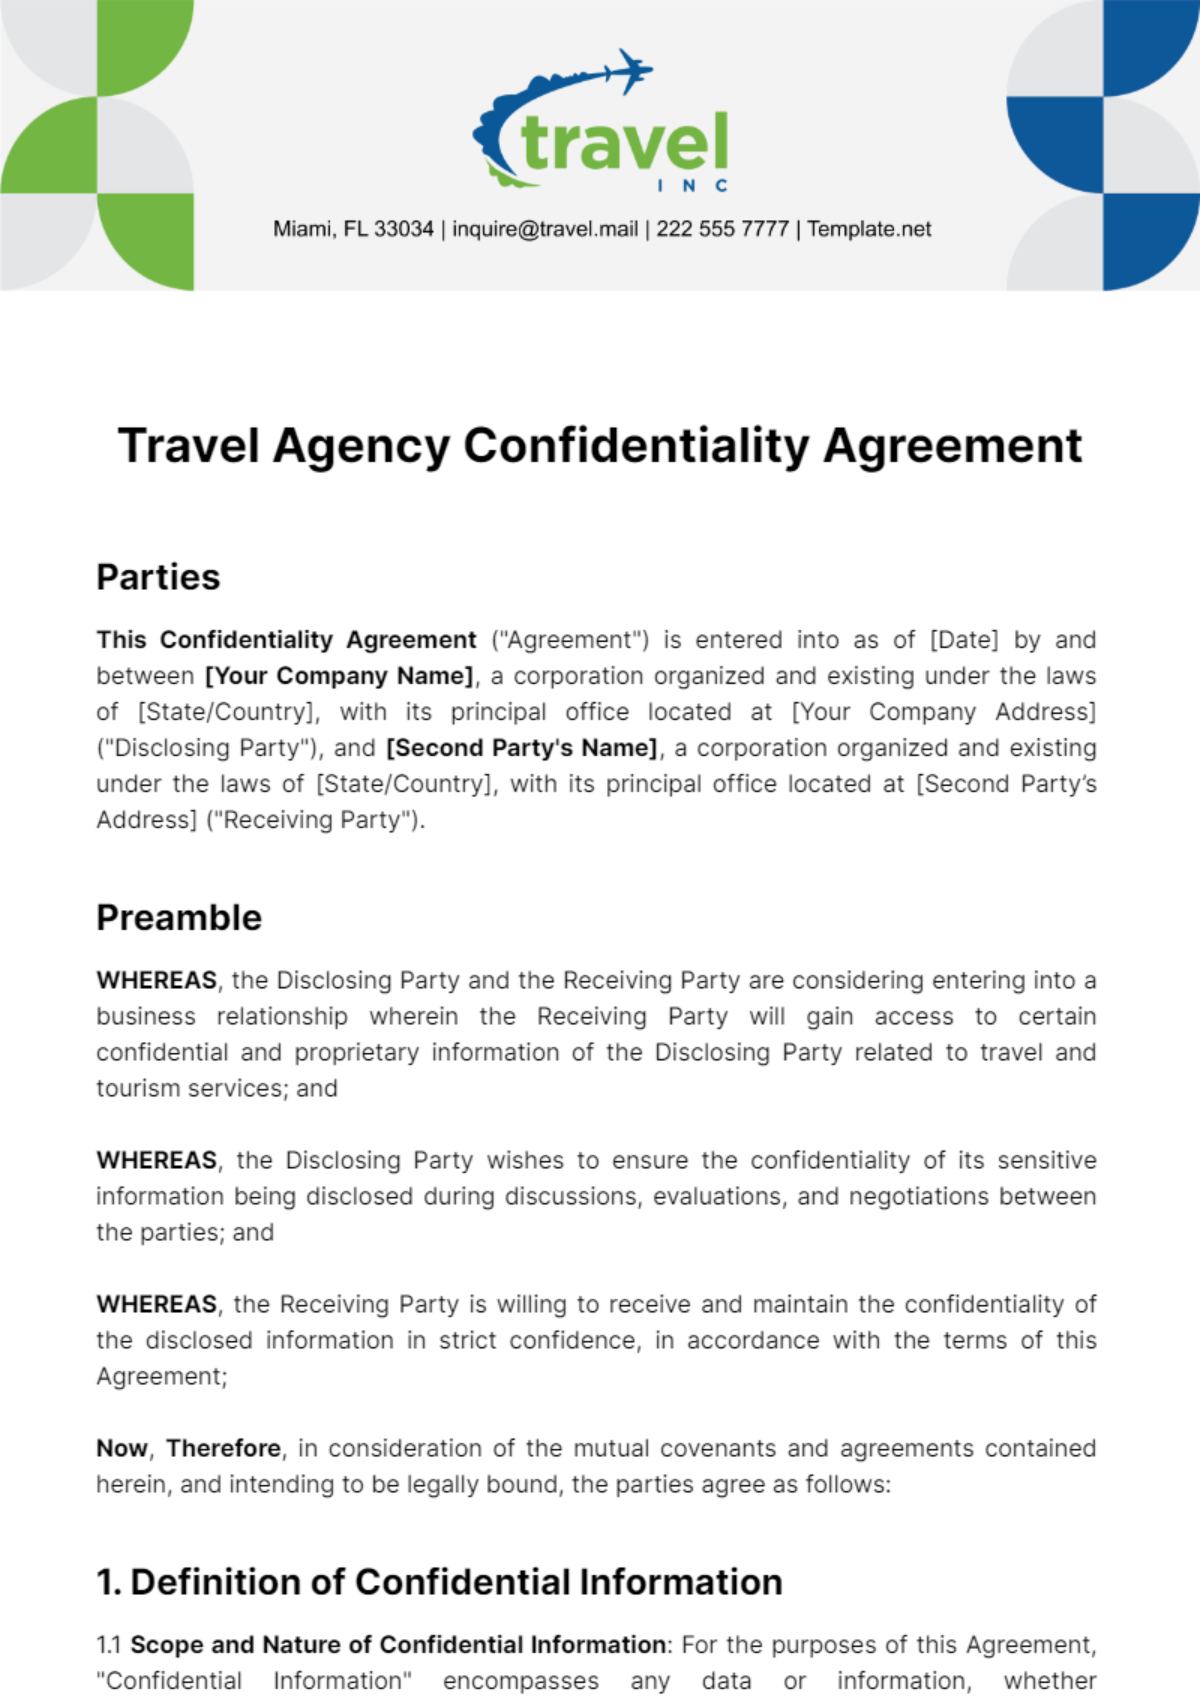 Travel Agency Confidentiality Agreement Template